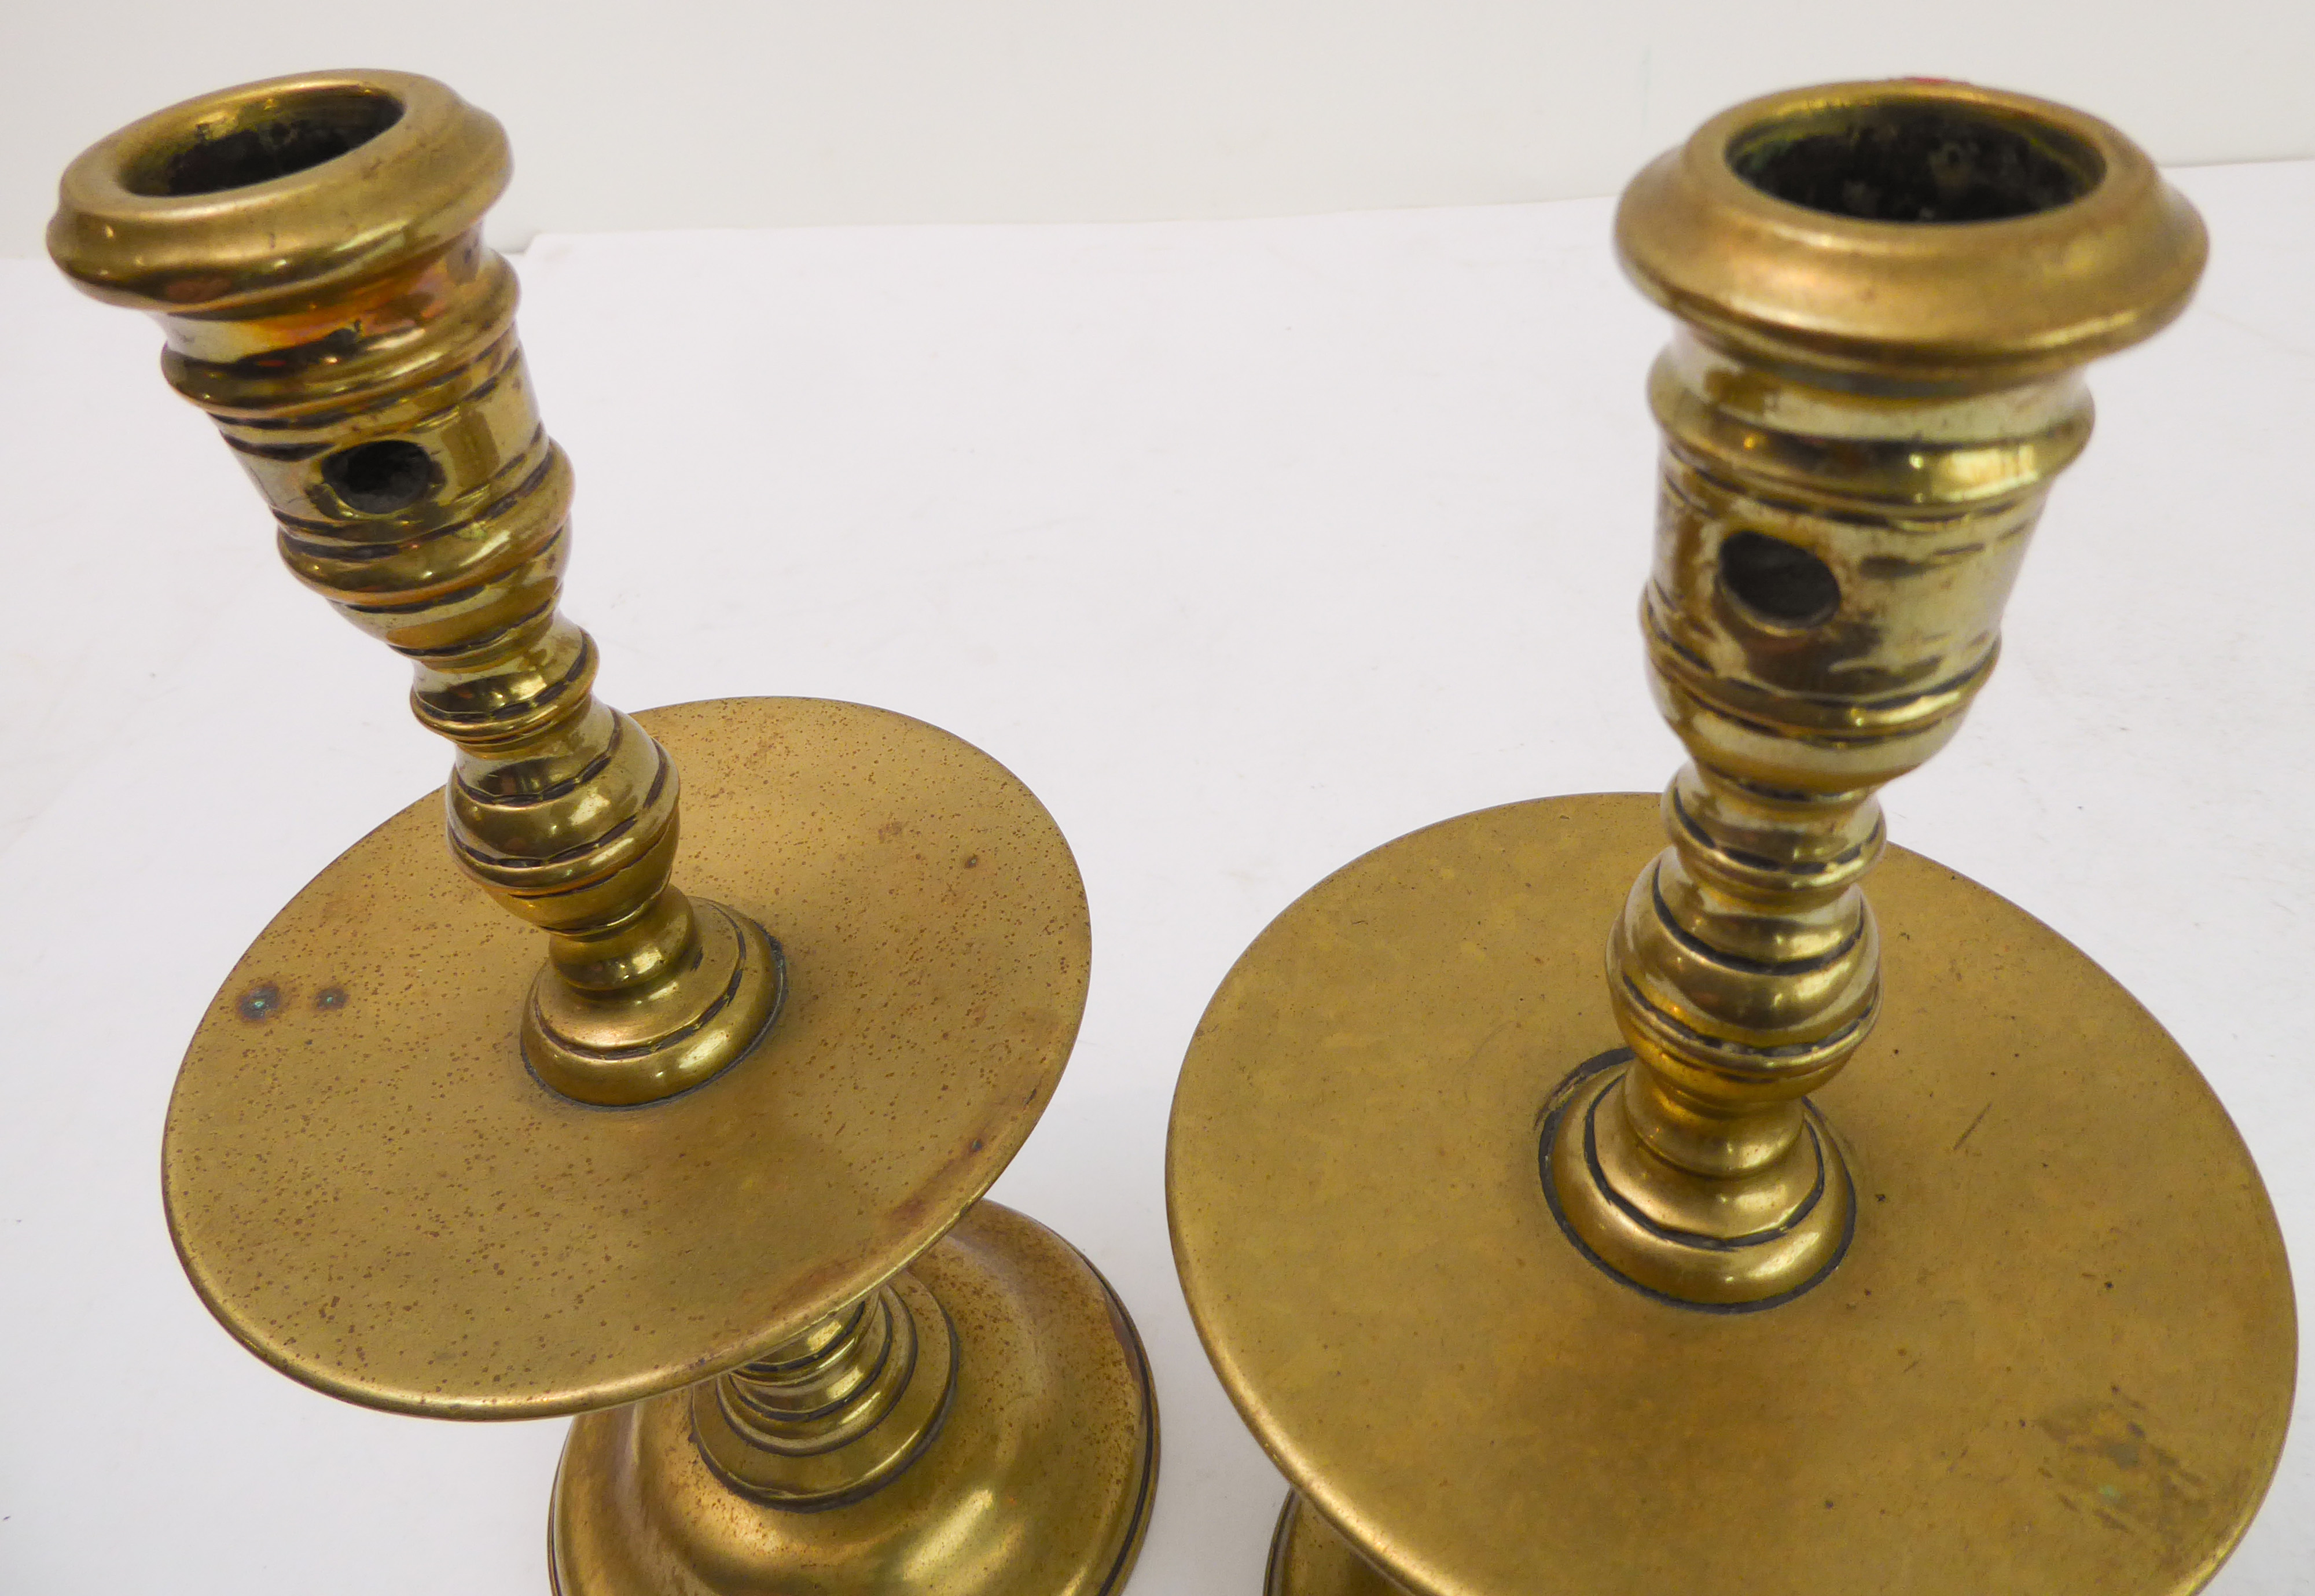 A pair of Dutch brass Heemskirk candlesticks (probably 19th century) in 17th century style) (18.5 cm - Image 3 of 3